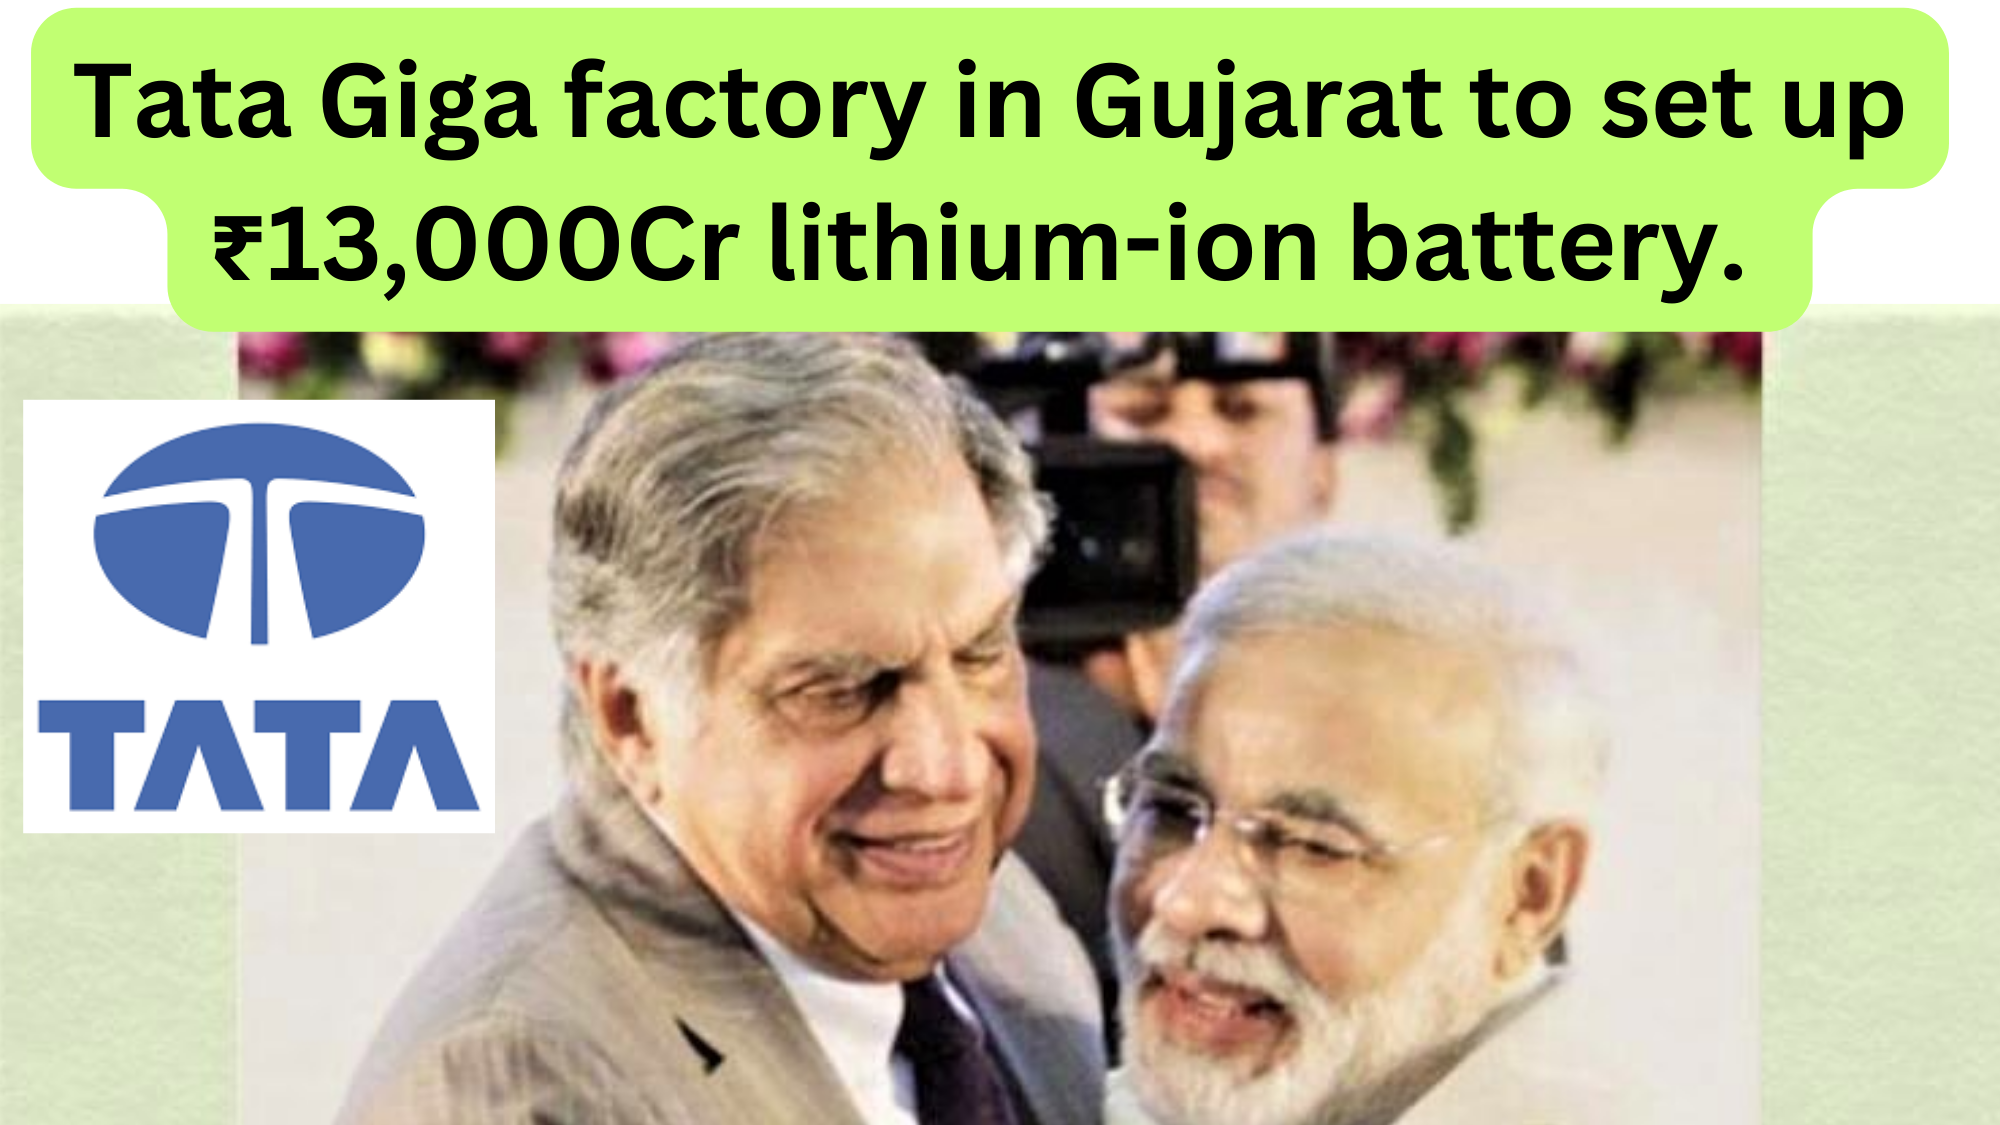 Tata Giga factory in Gujarat to set up ₹13,000 crore lithium-ion battery